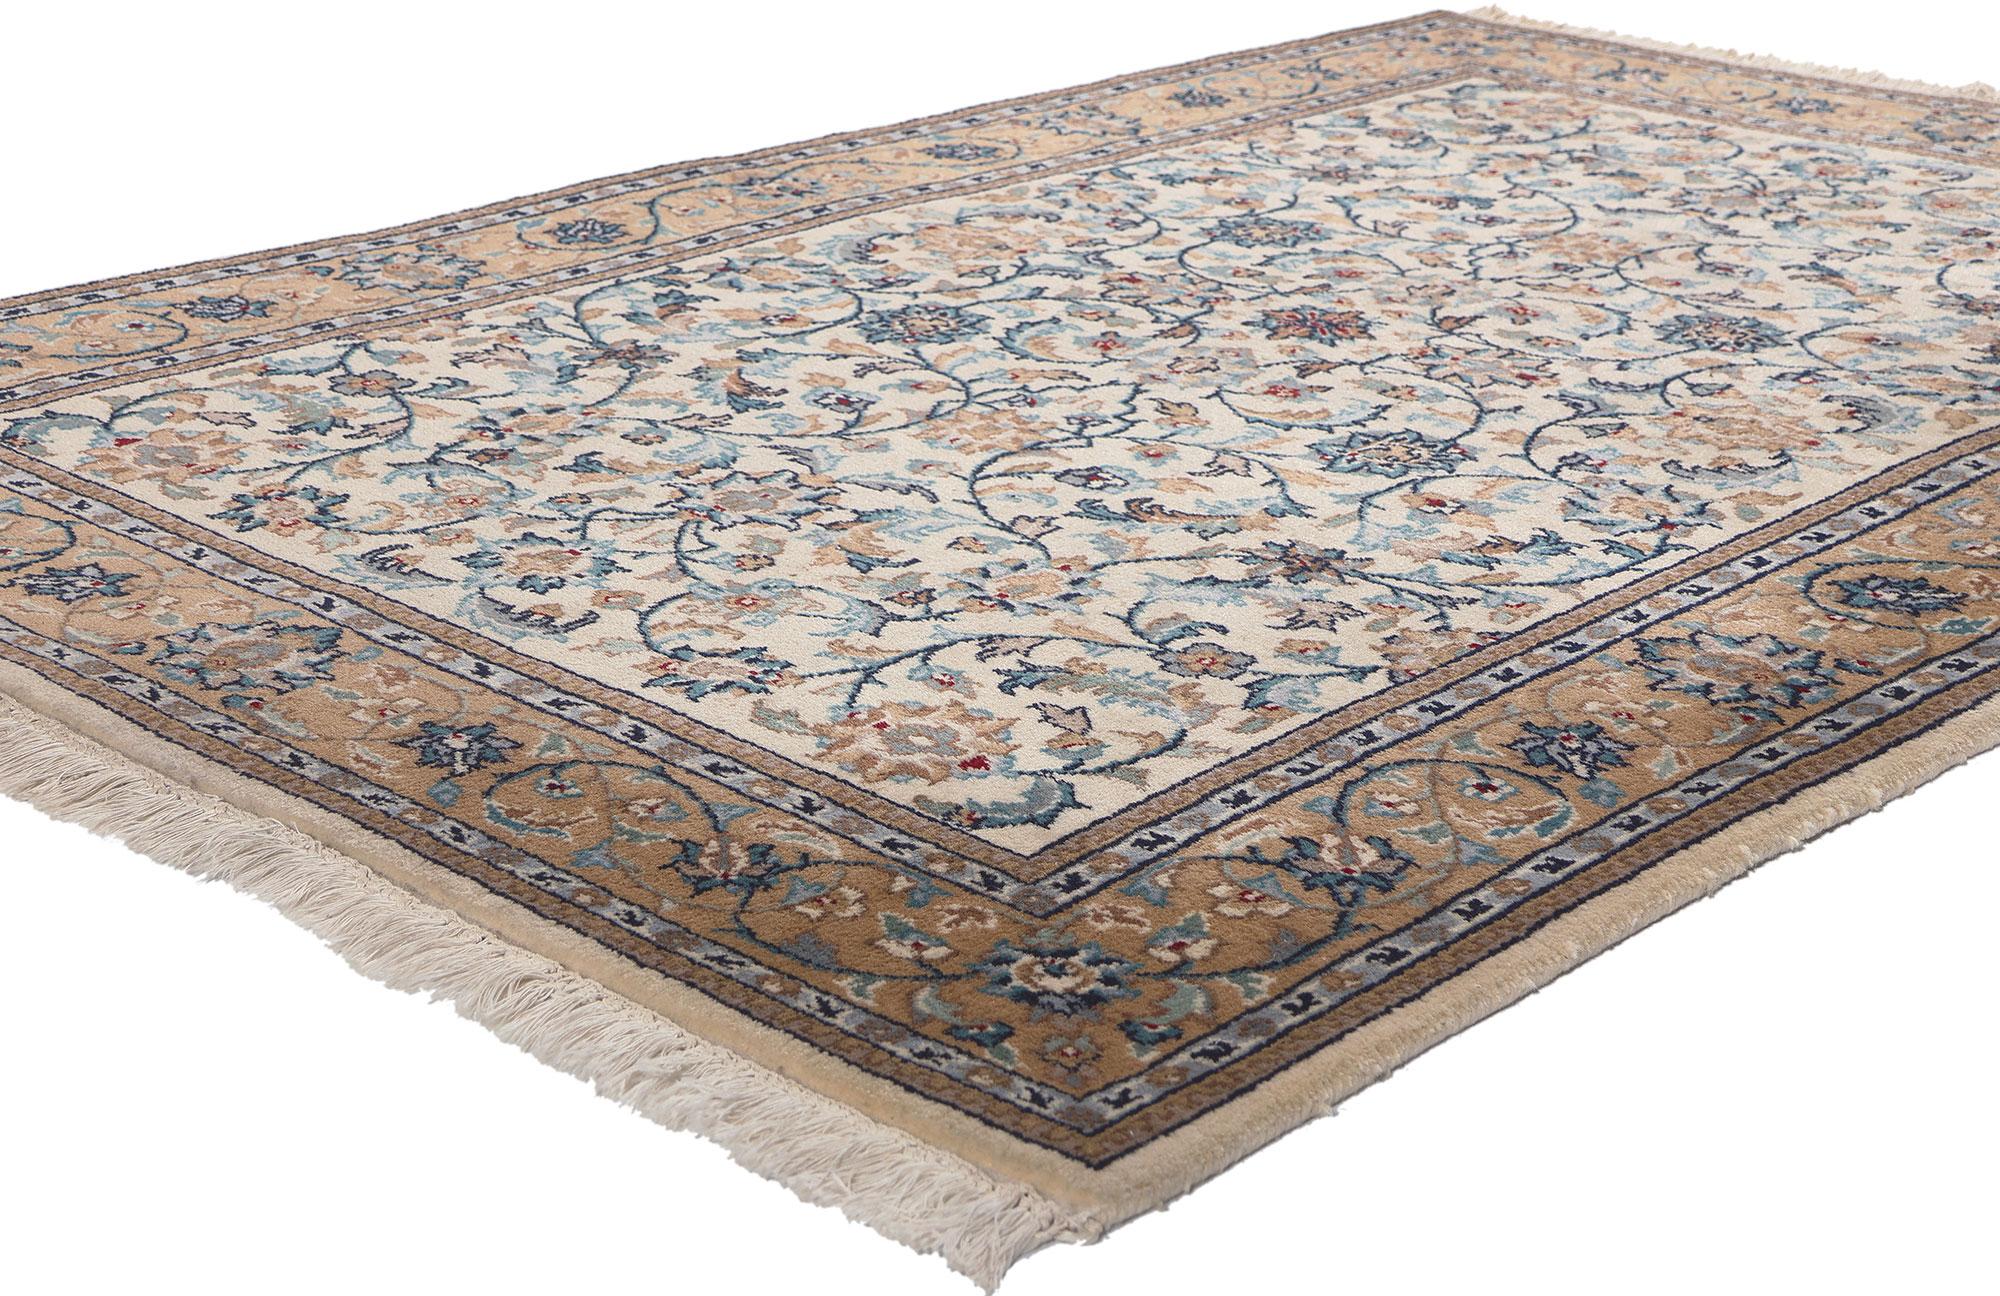 78691 Vintage Indian Kashan Rug, 04'01 x 06'00. Witness an exquisite manifestation of a bygone epoch – a vintage Indian Kashan rug, epitomizing Victorian elegance in its purest form, meticulously hand-knotted from the most refined wool. The